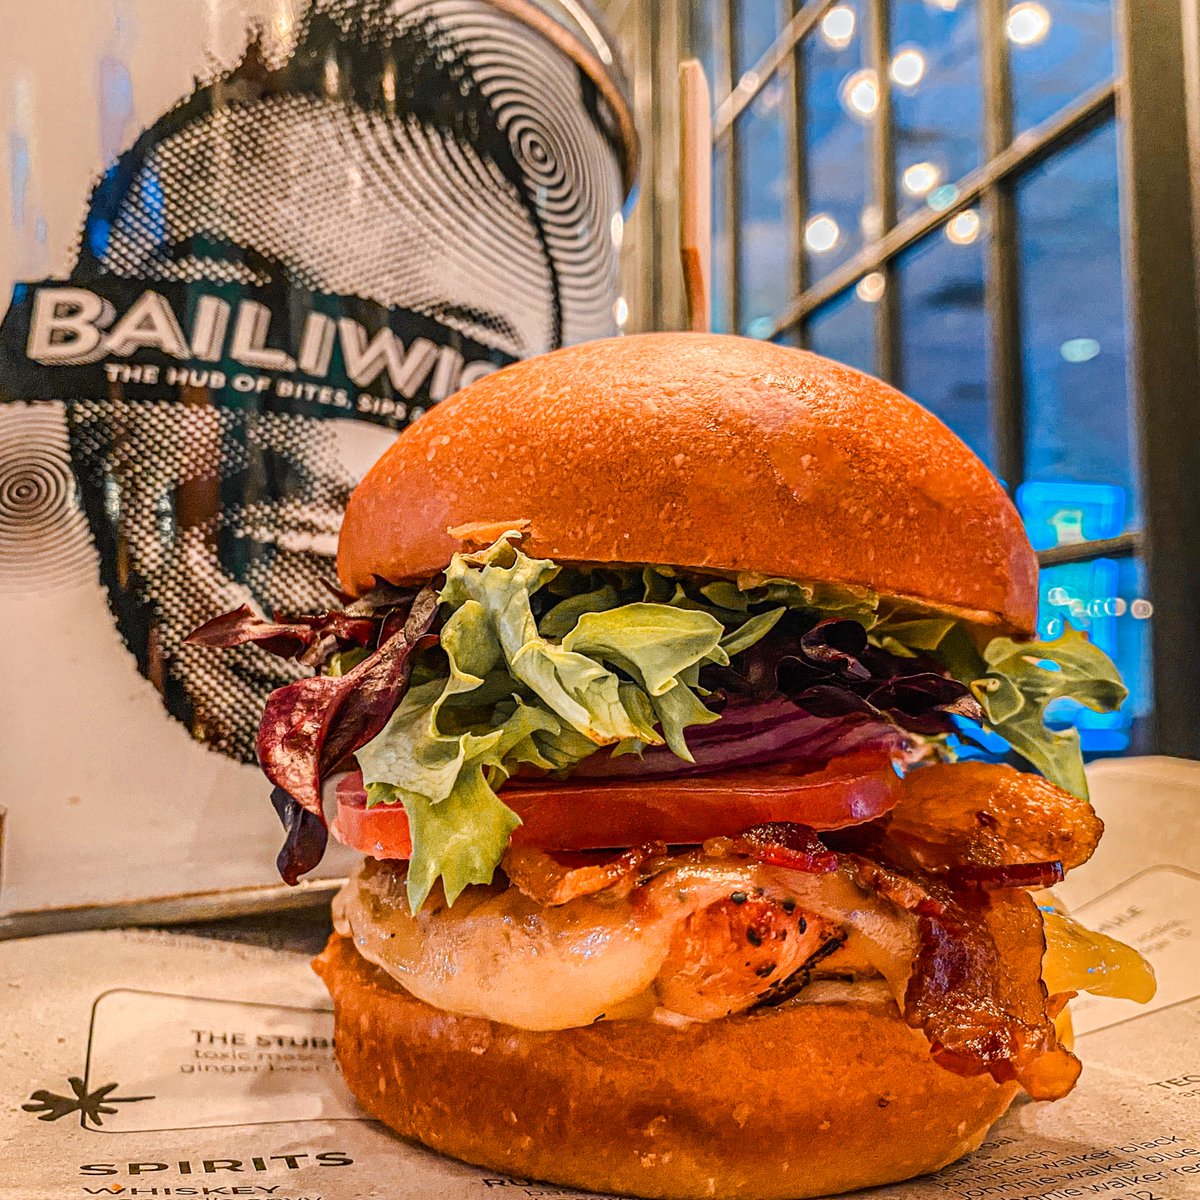 Here's something to whet your appetite for Rockabilly. Bailiwick is rolling out a ROCK N' CHICKEN BURGER for the iconic weekend! Grilled chicken piled high with cheese, bacon, avocado, tomato, onions and mixed greens. 🐔 Make sure you come here hungry!